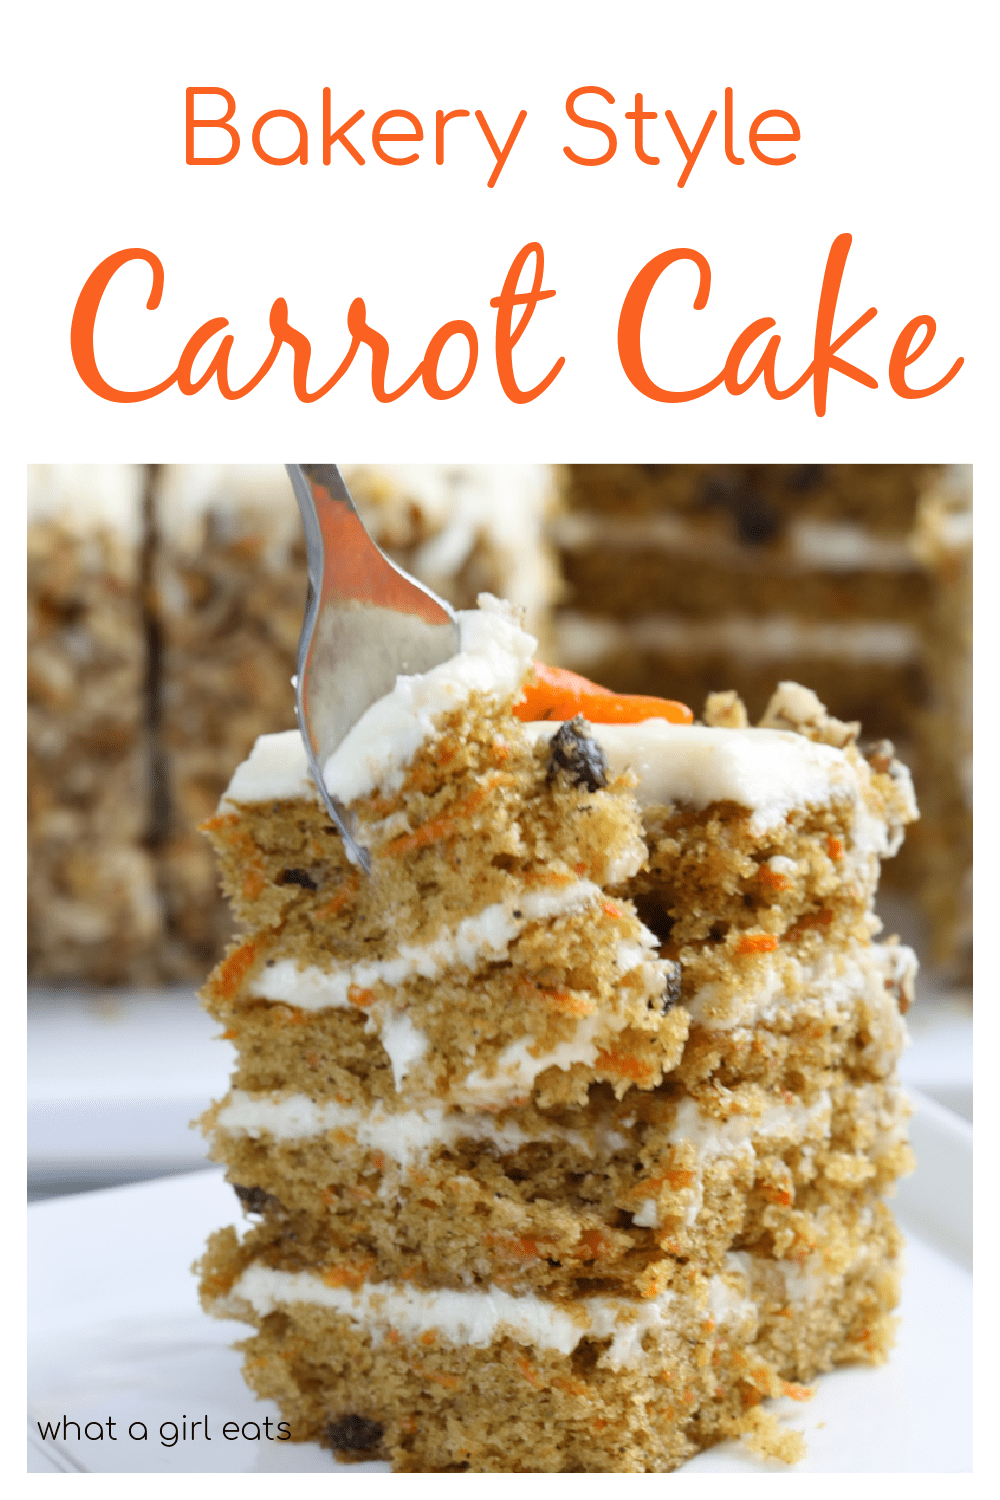 Bakery style carrot cake with cream cheese frosting is four layers filled with luscious buttermilk cream cheese frosting.